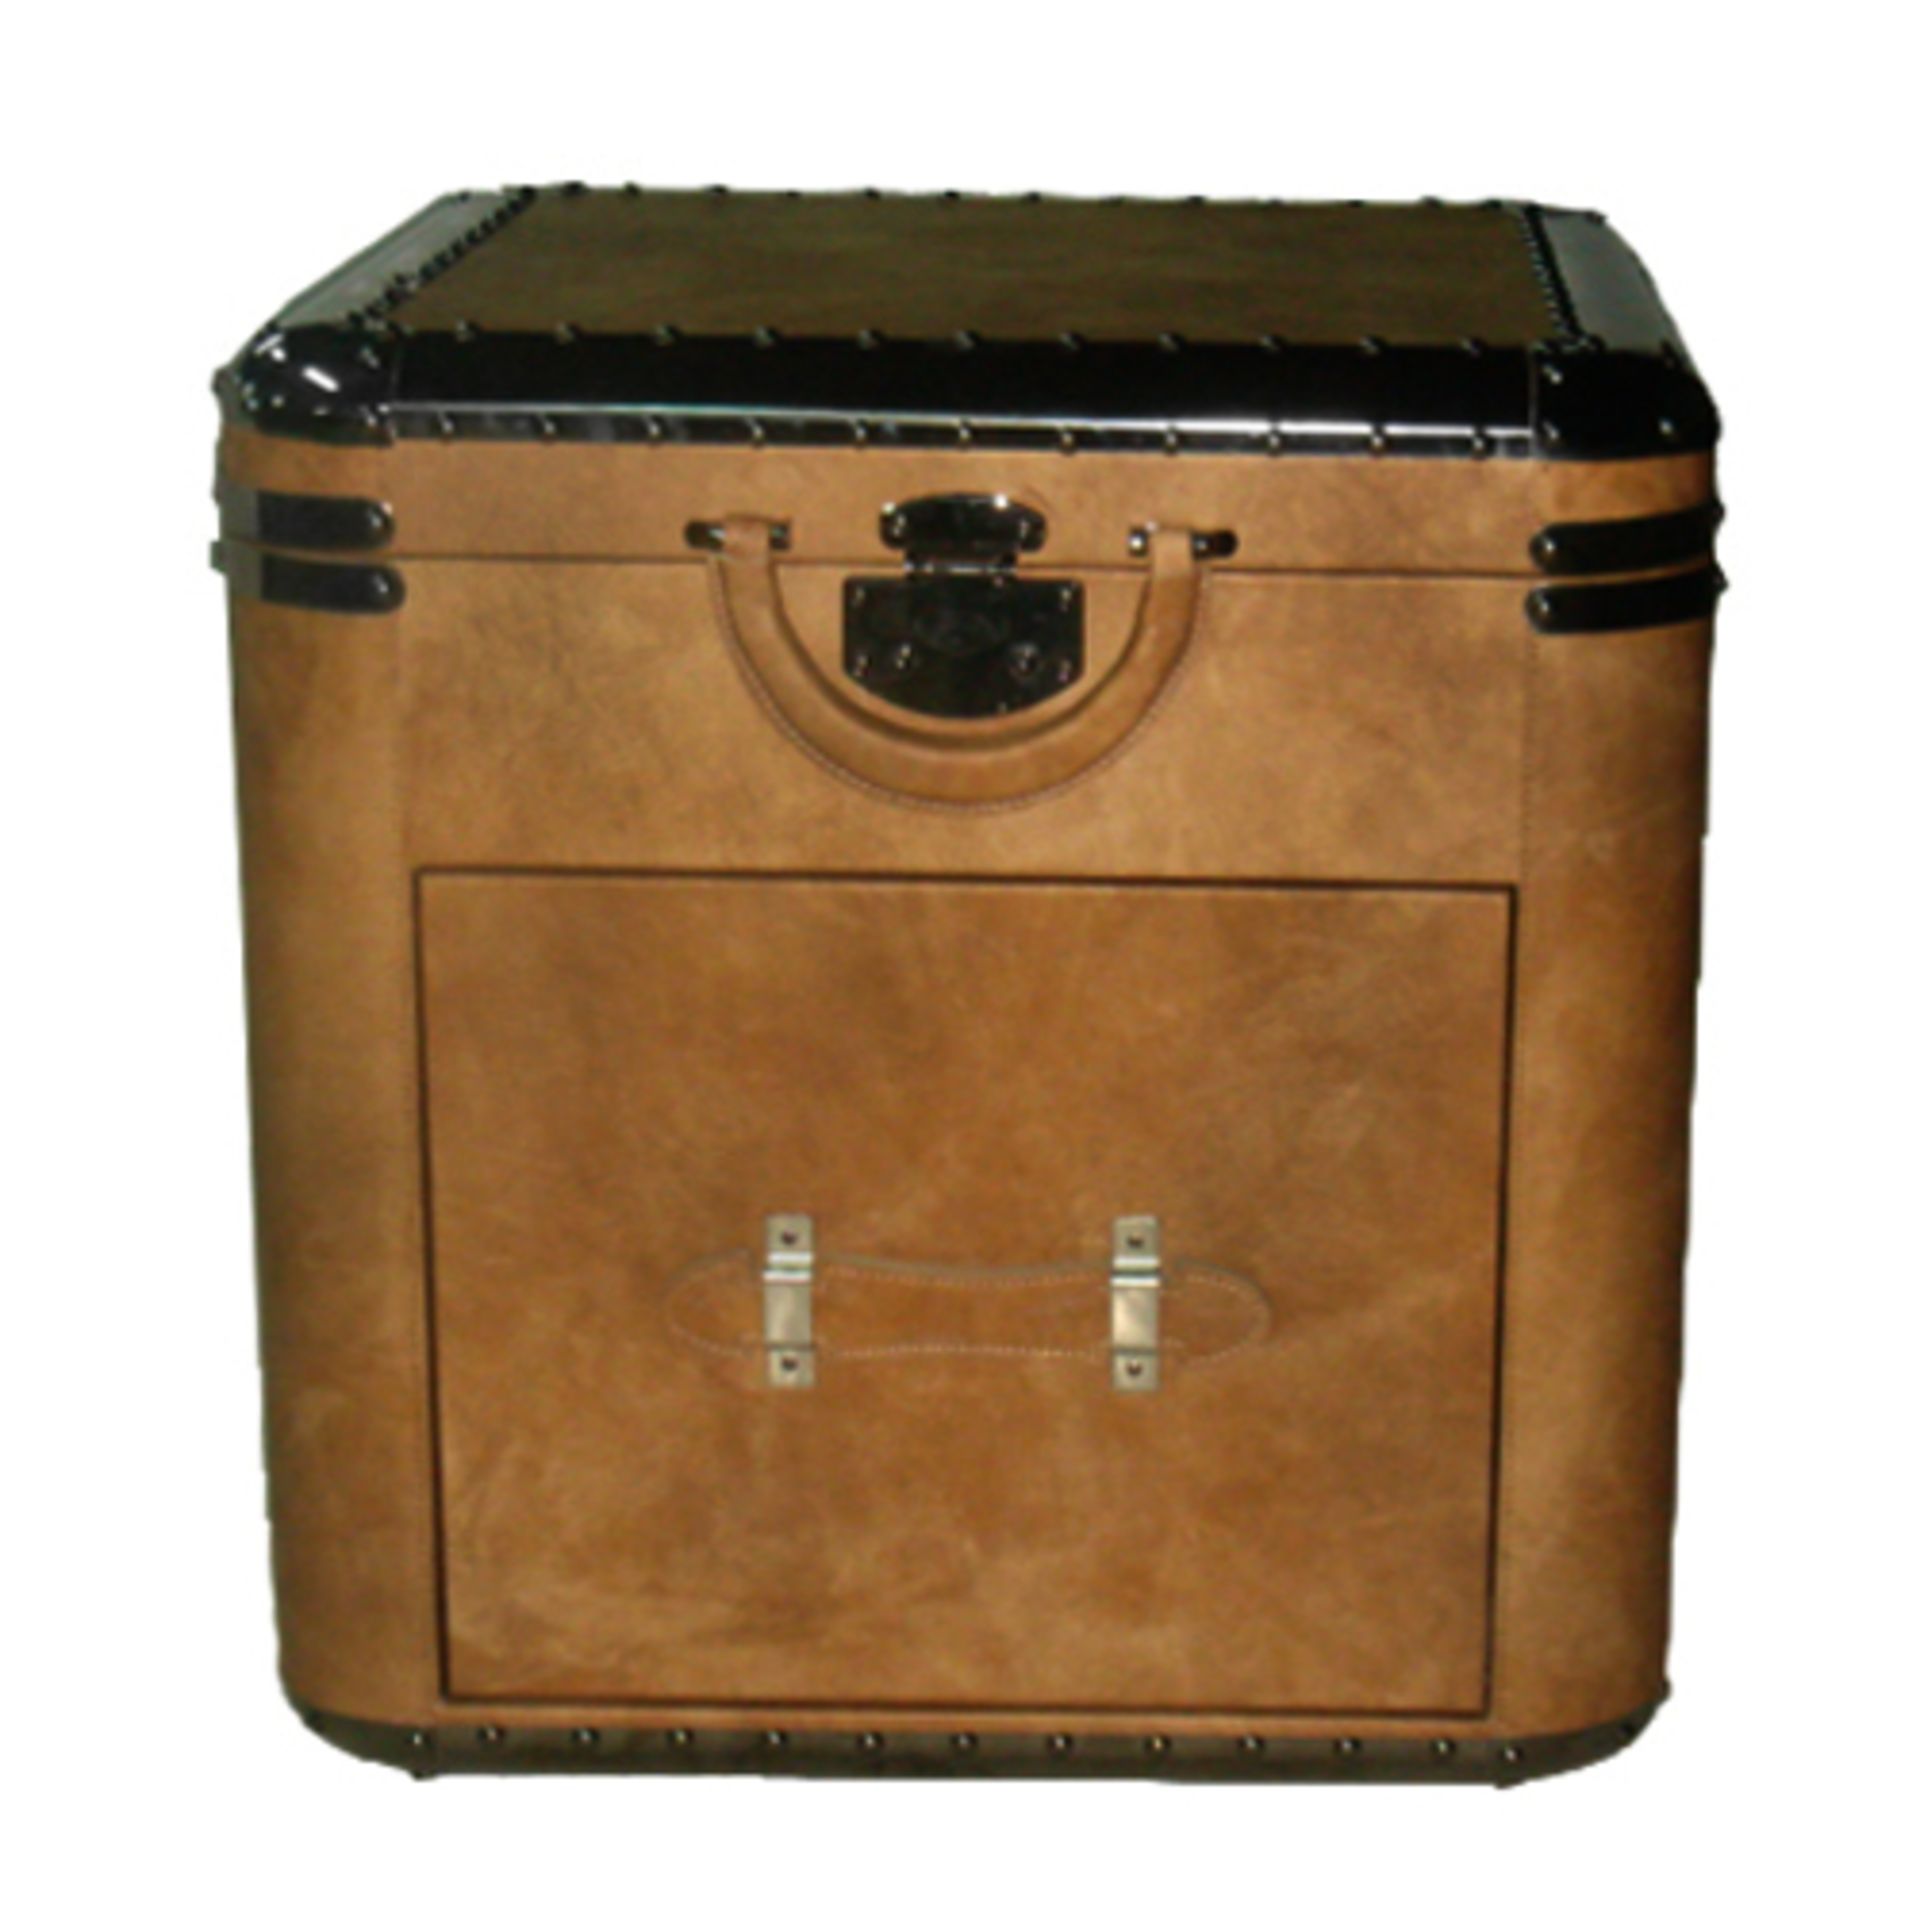 Vantage Lamp Table Reinterpretation Of The Vintage Steamer Trunks This Coffee Table Is Detailed With